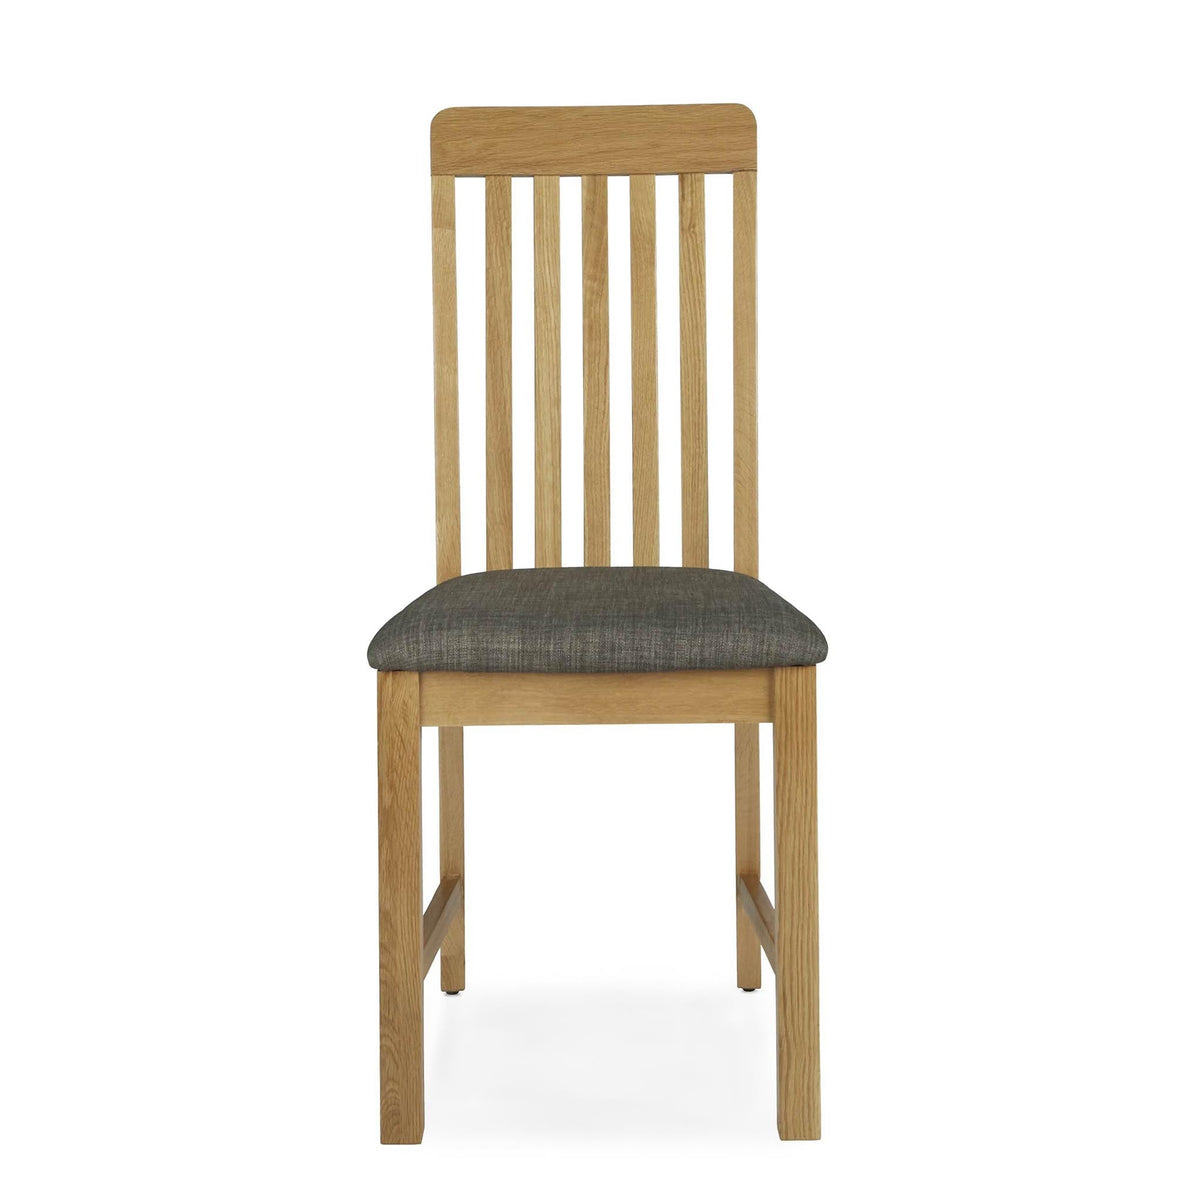 Alba Oak Slatted Dining Chair - Front view